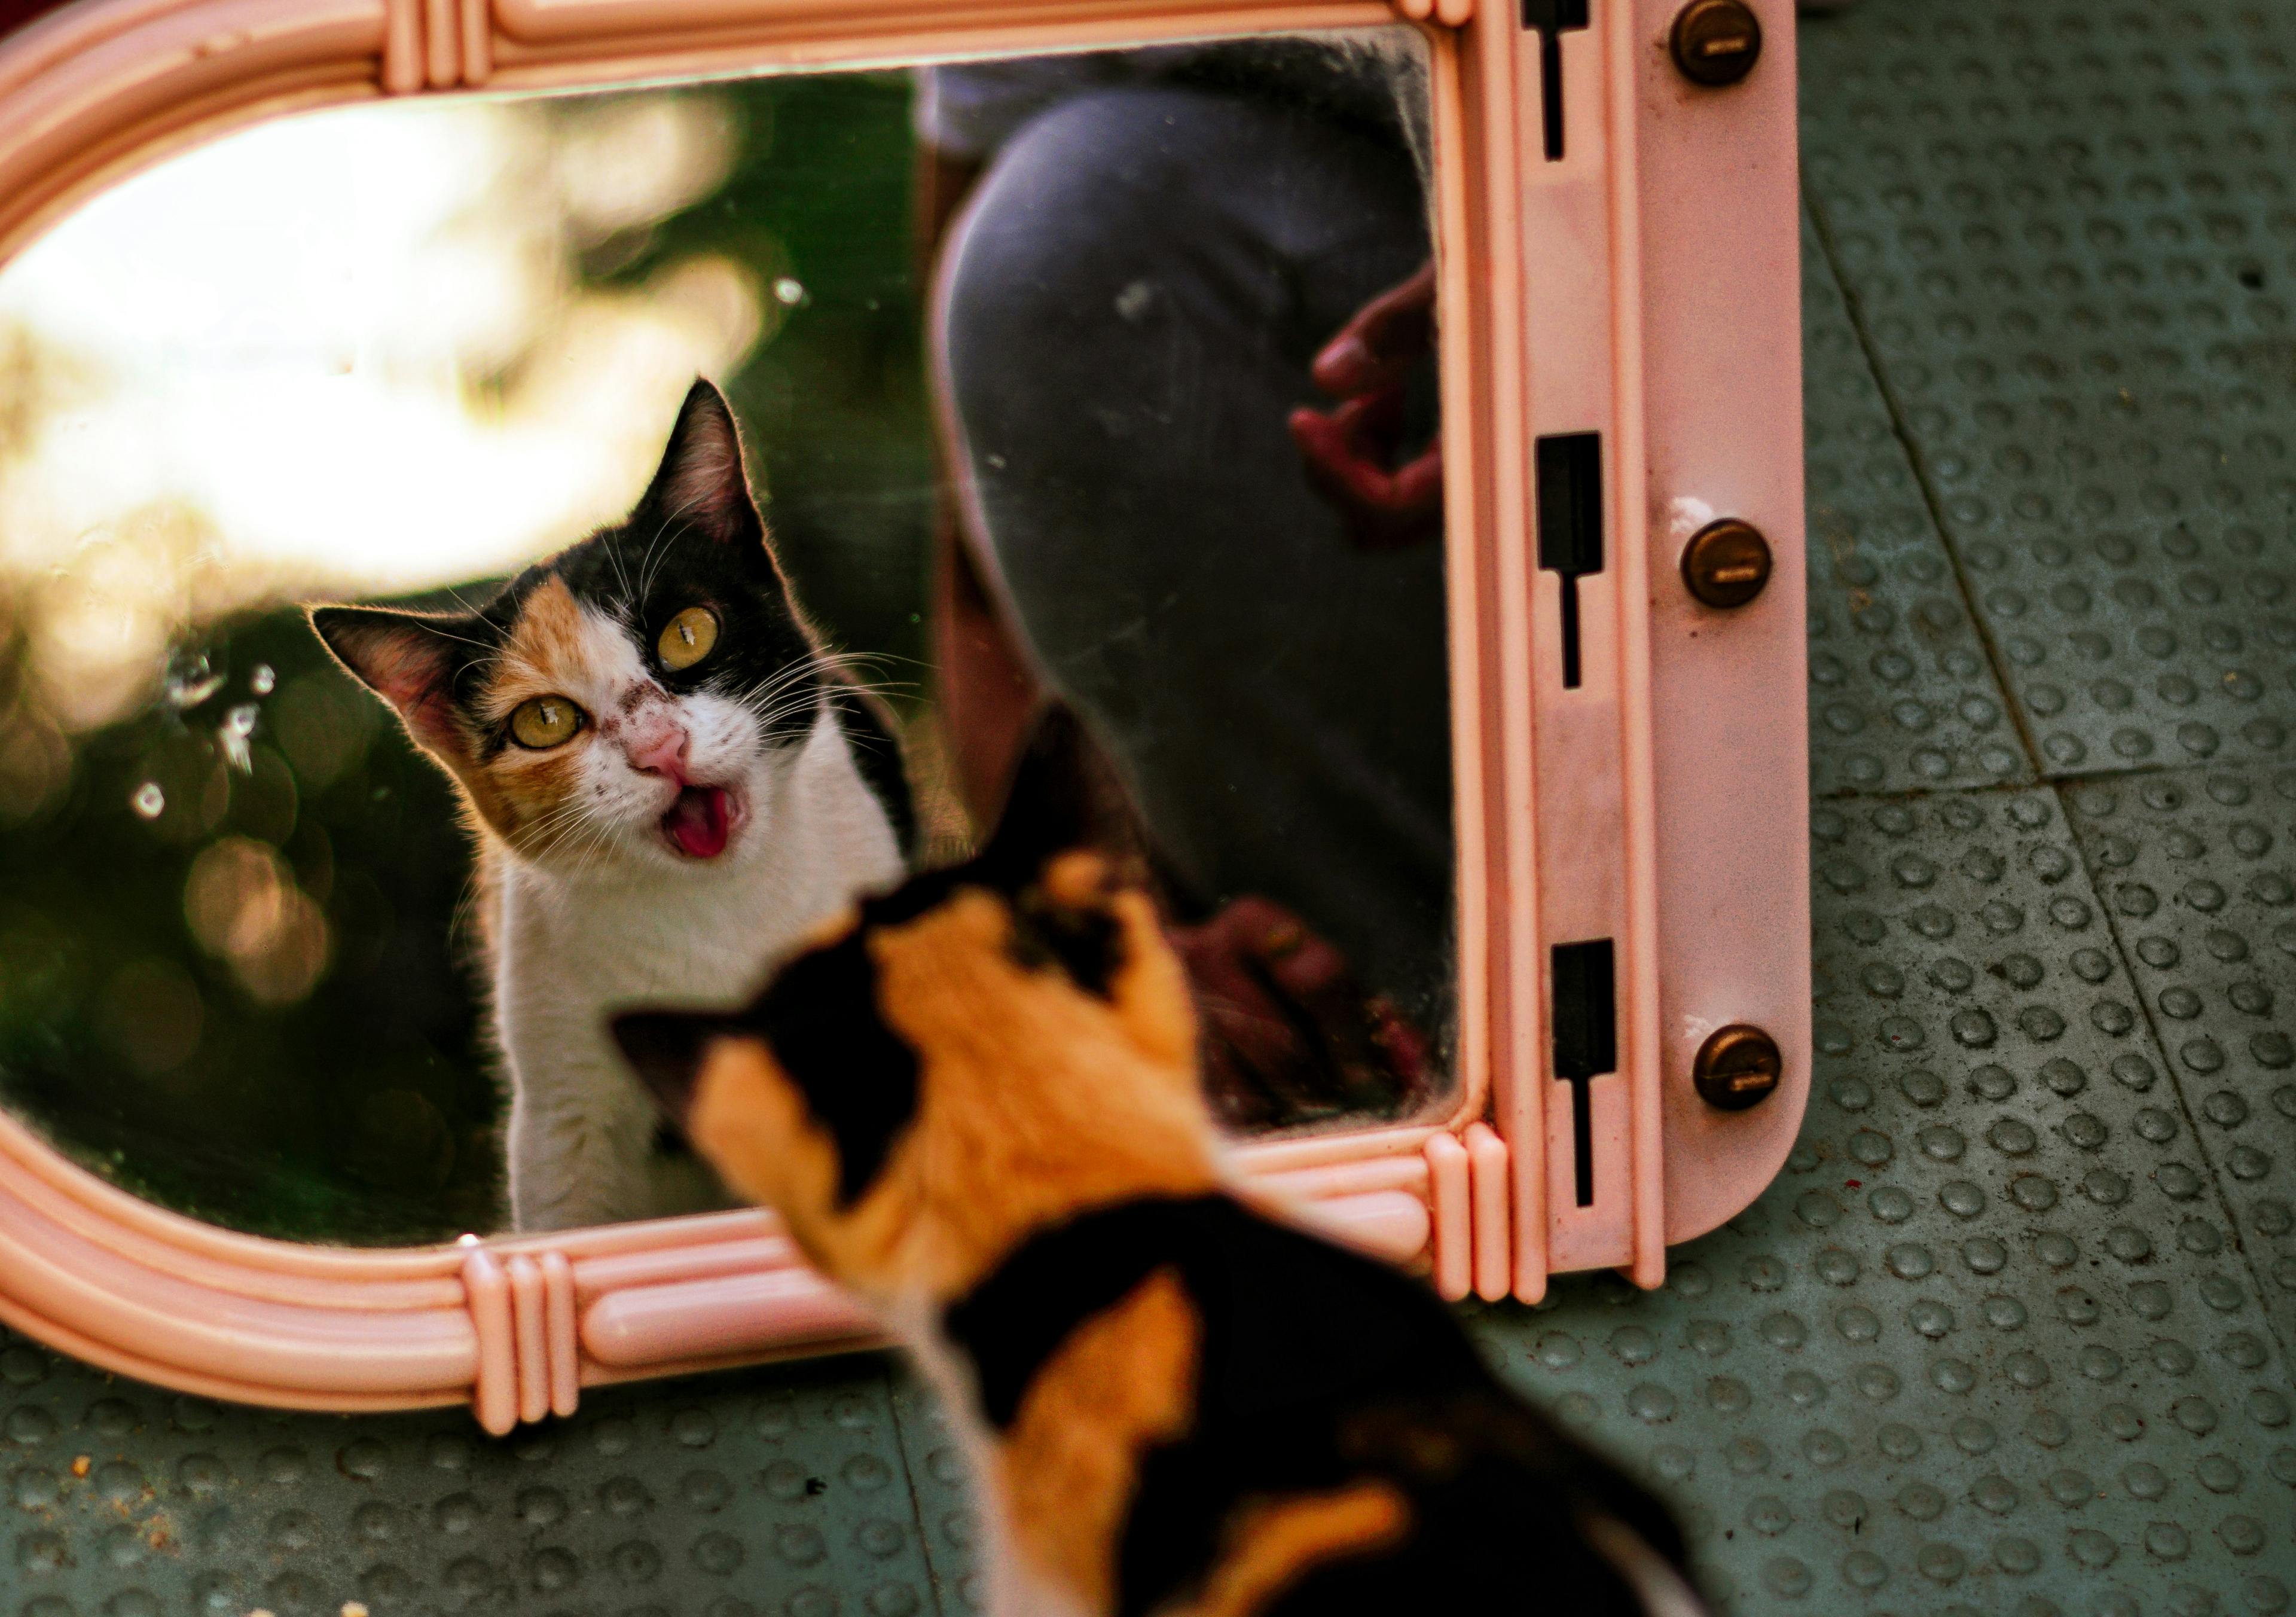 Do Cats Recognize Themselves in the Mirror?